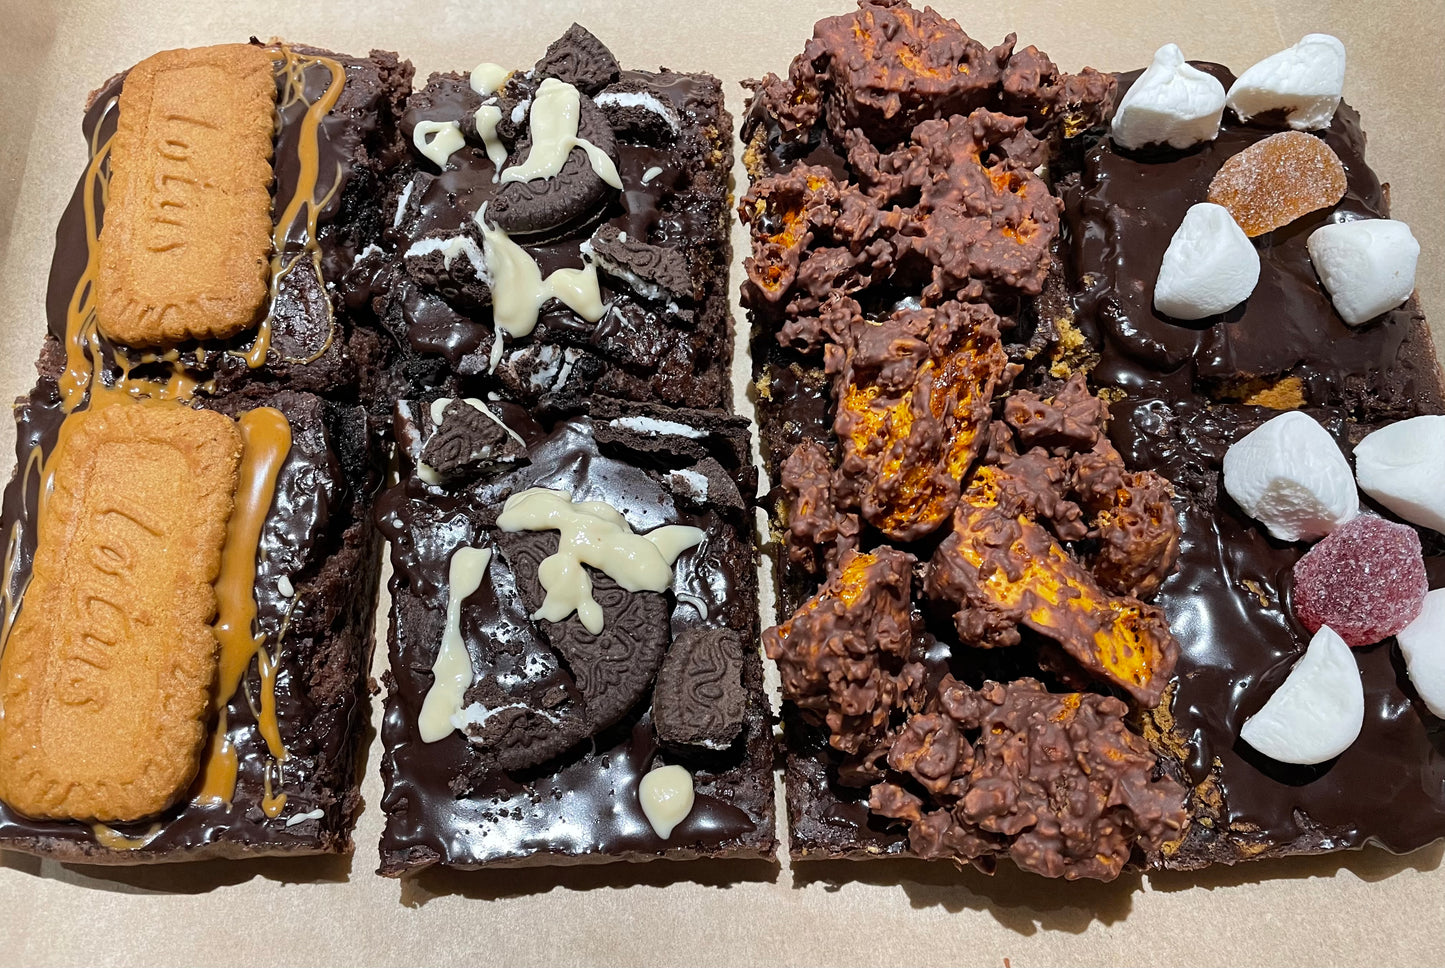 New Mixed Chocolate Brownies